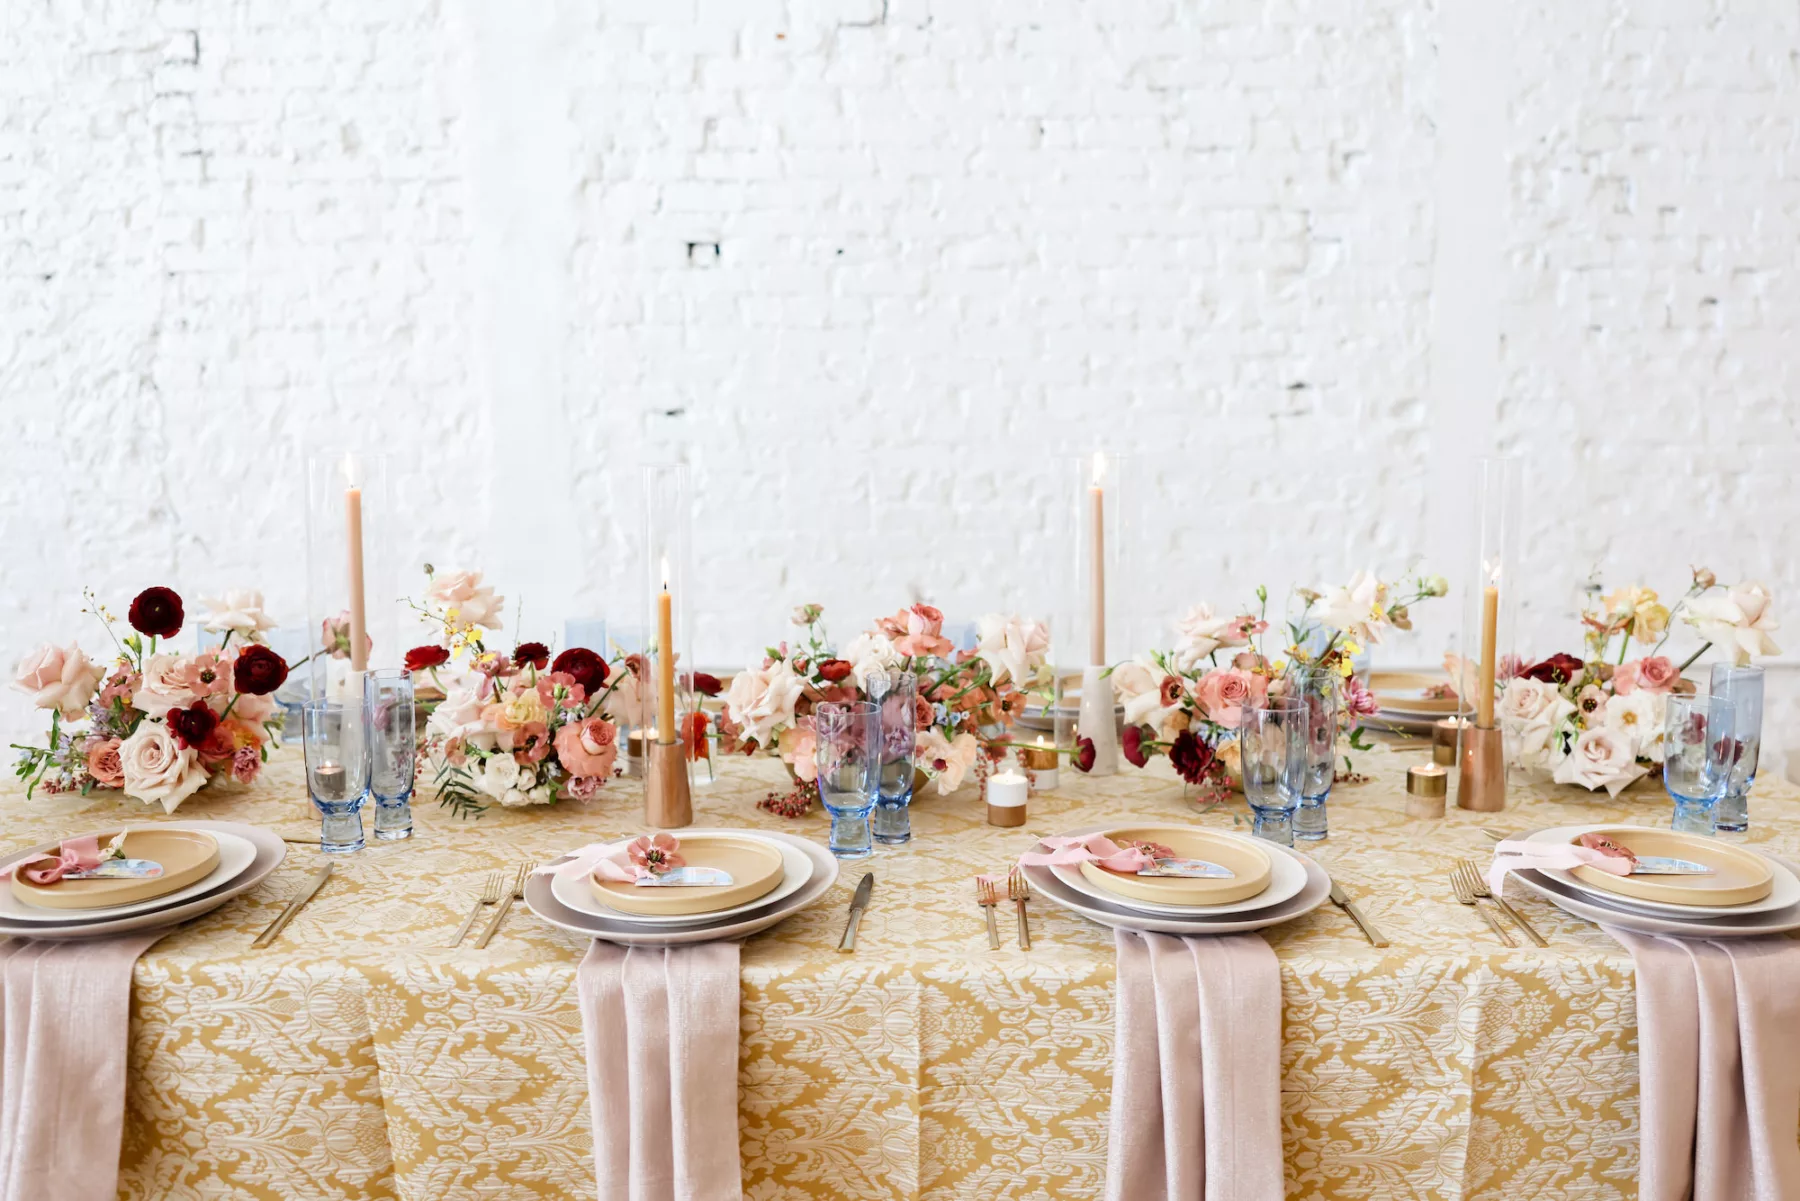 Retro Mid-Century Wedding Reception Yellow, Pink, Blue, and Red Tablescape Place Setting Decor Inspiration | Tampa Bay Planner Blue Skies Events